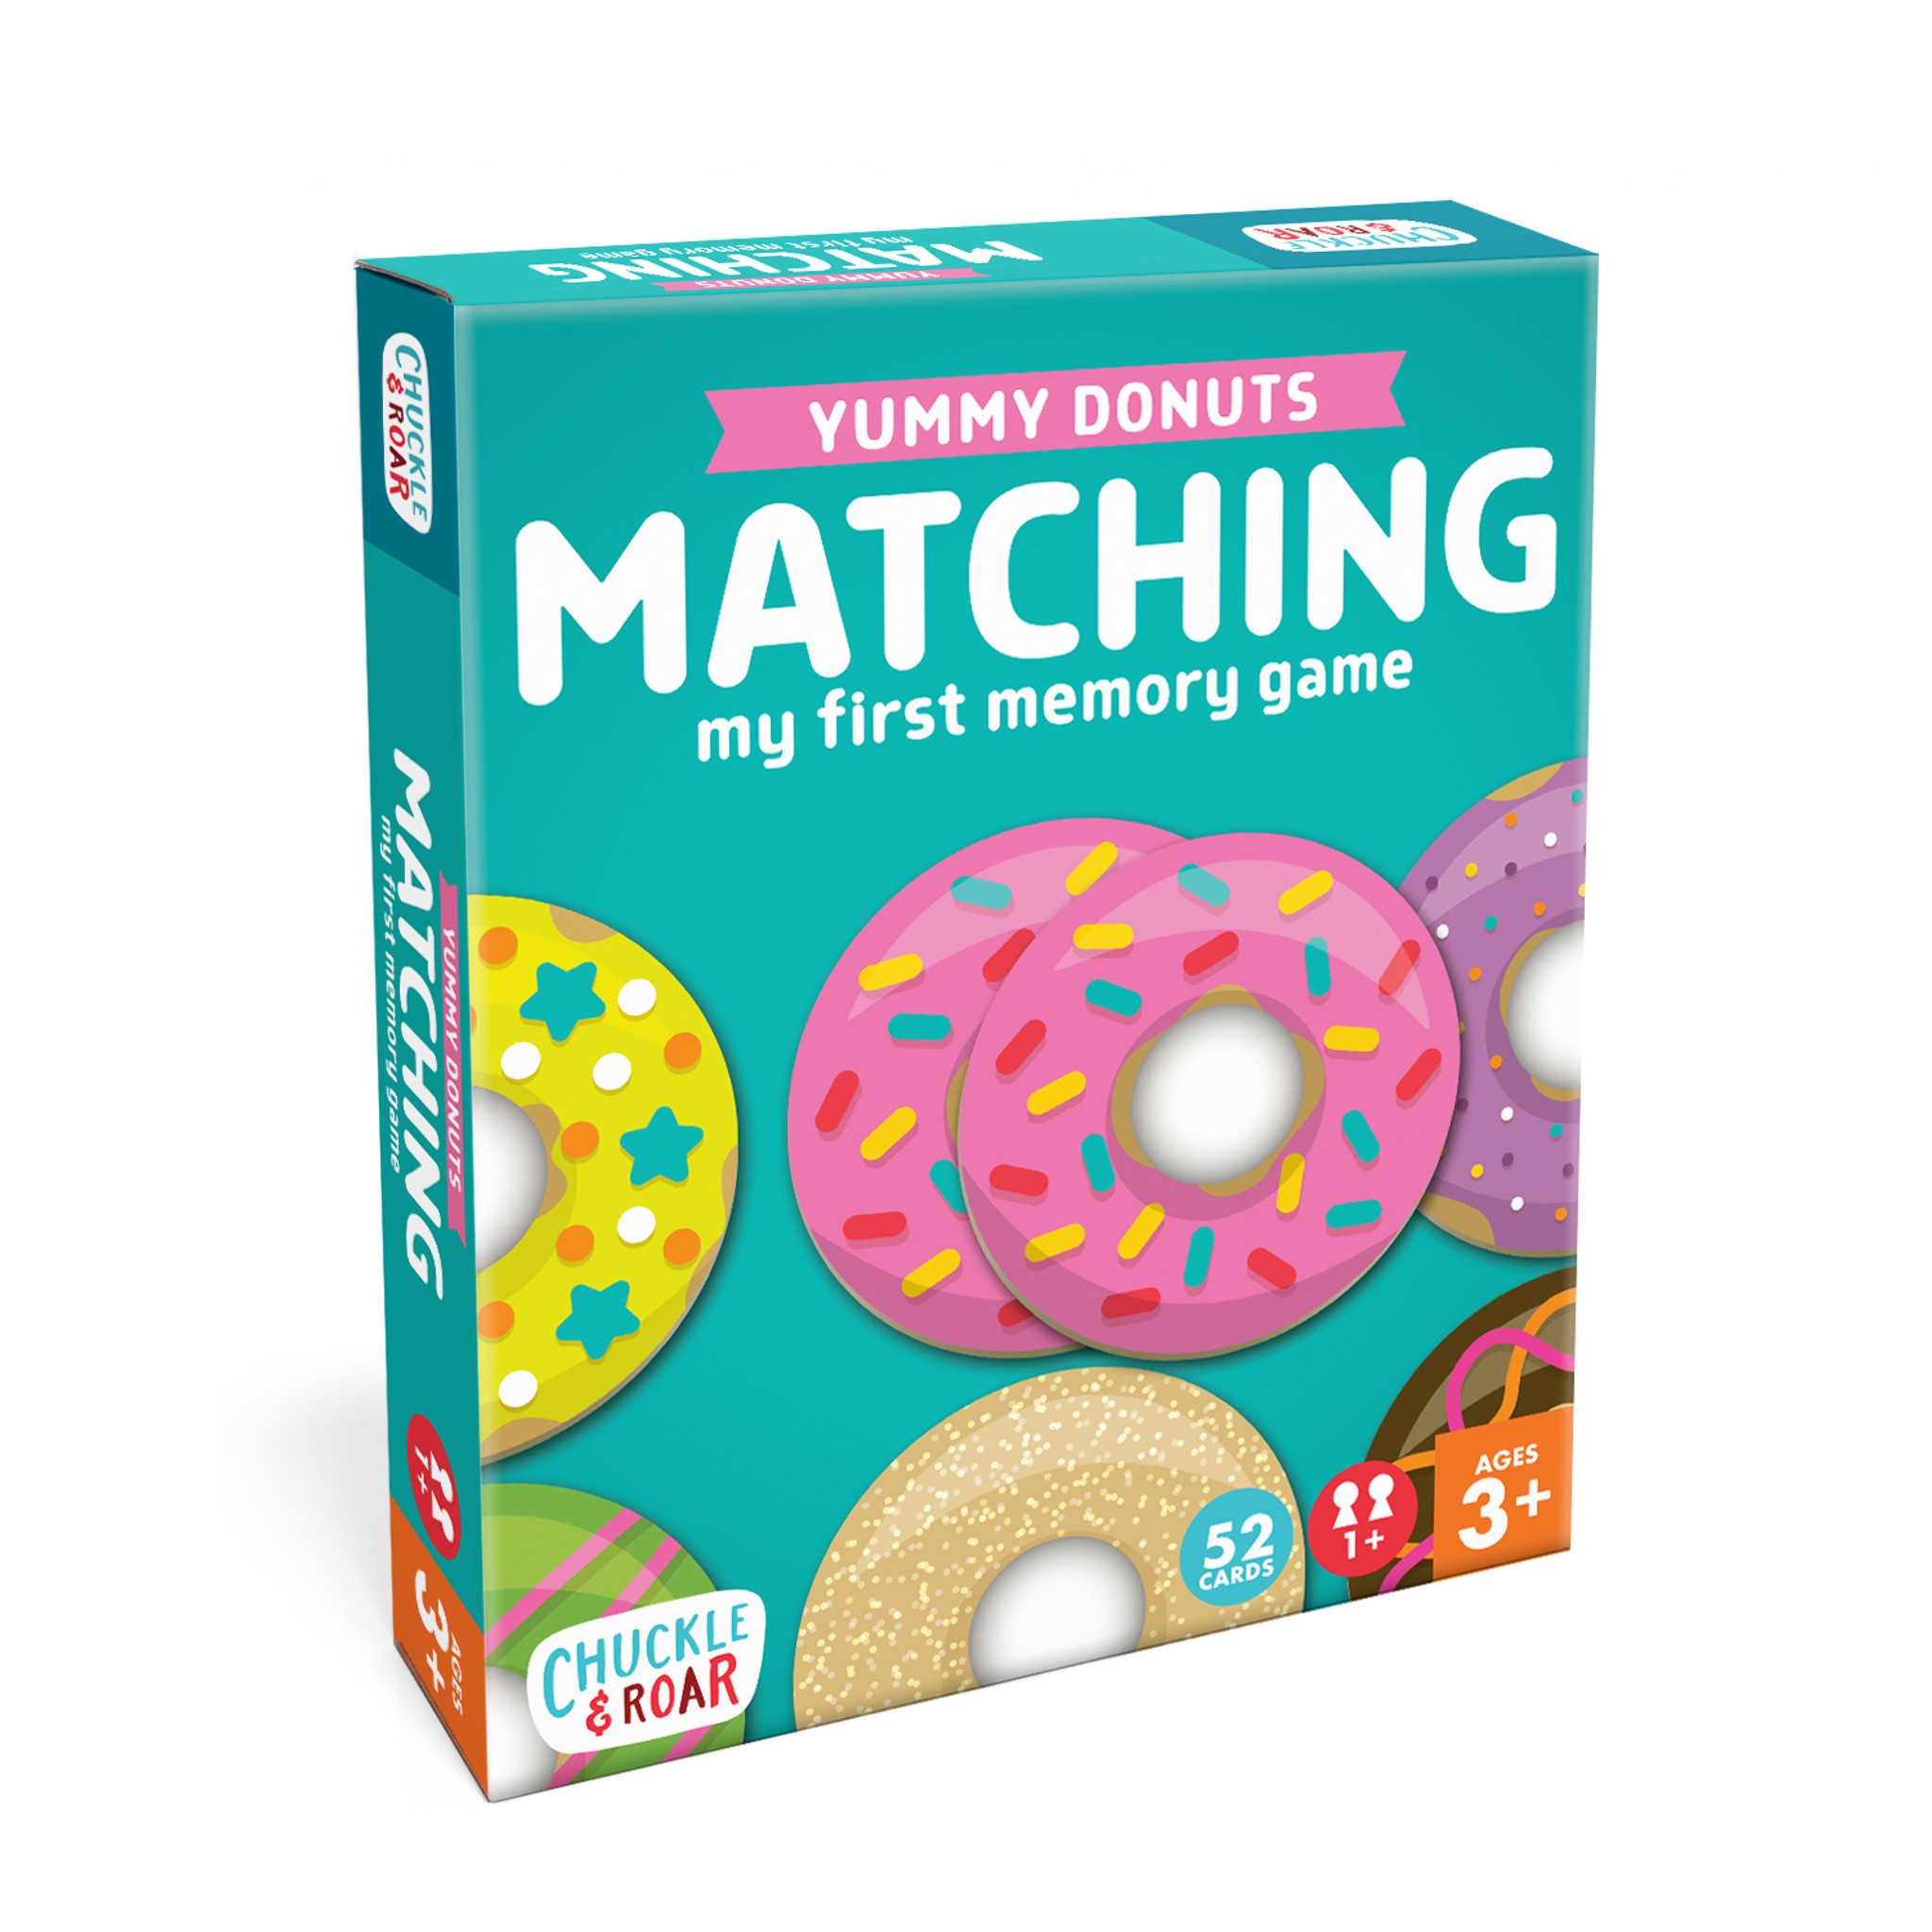 Online Memory Matching Games for Adults: Donuts